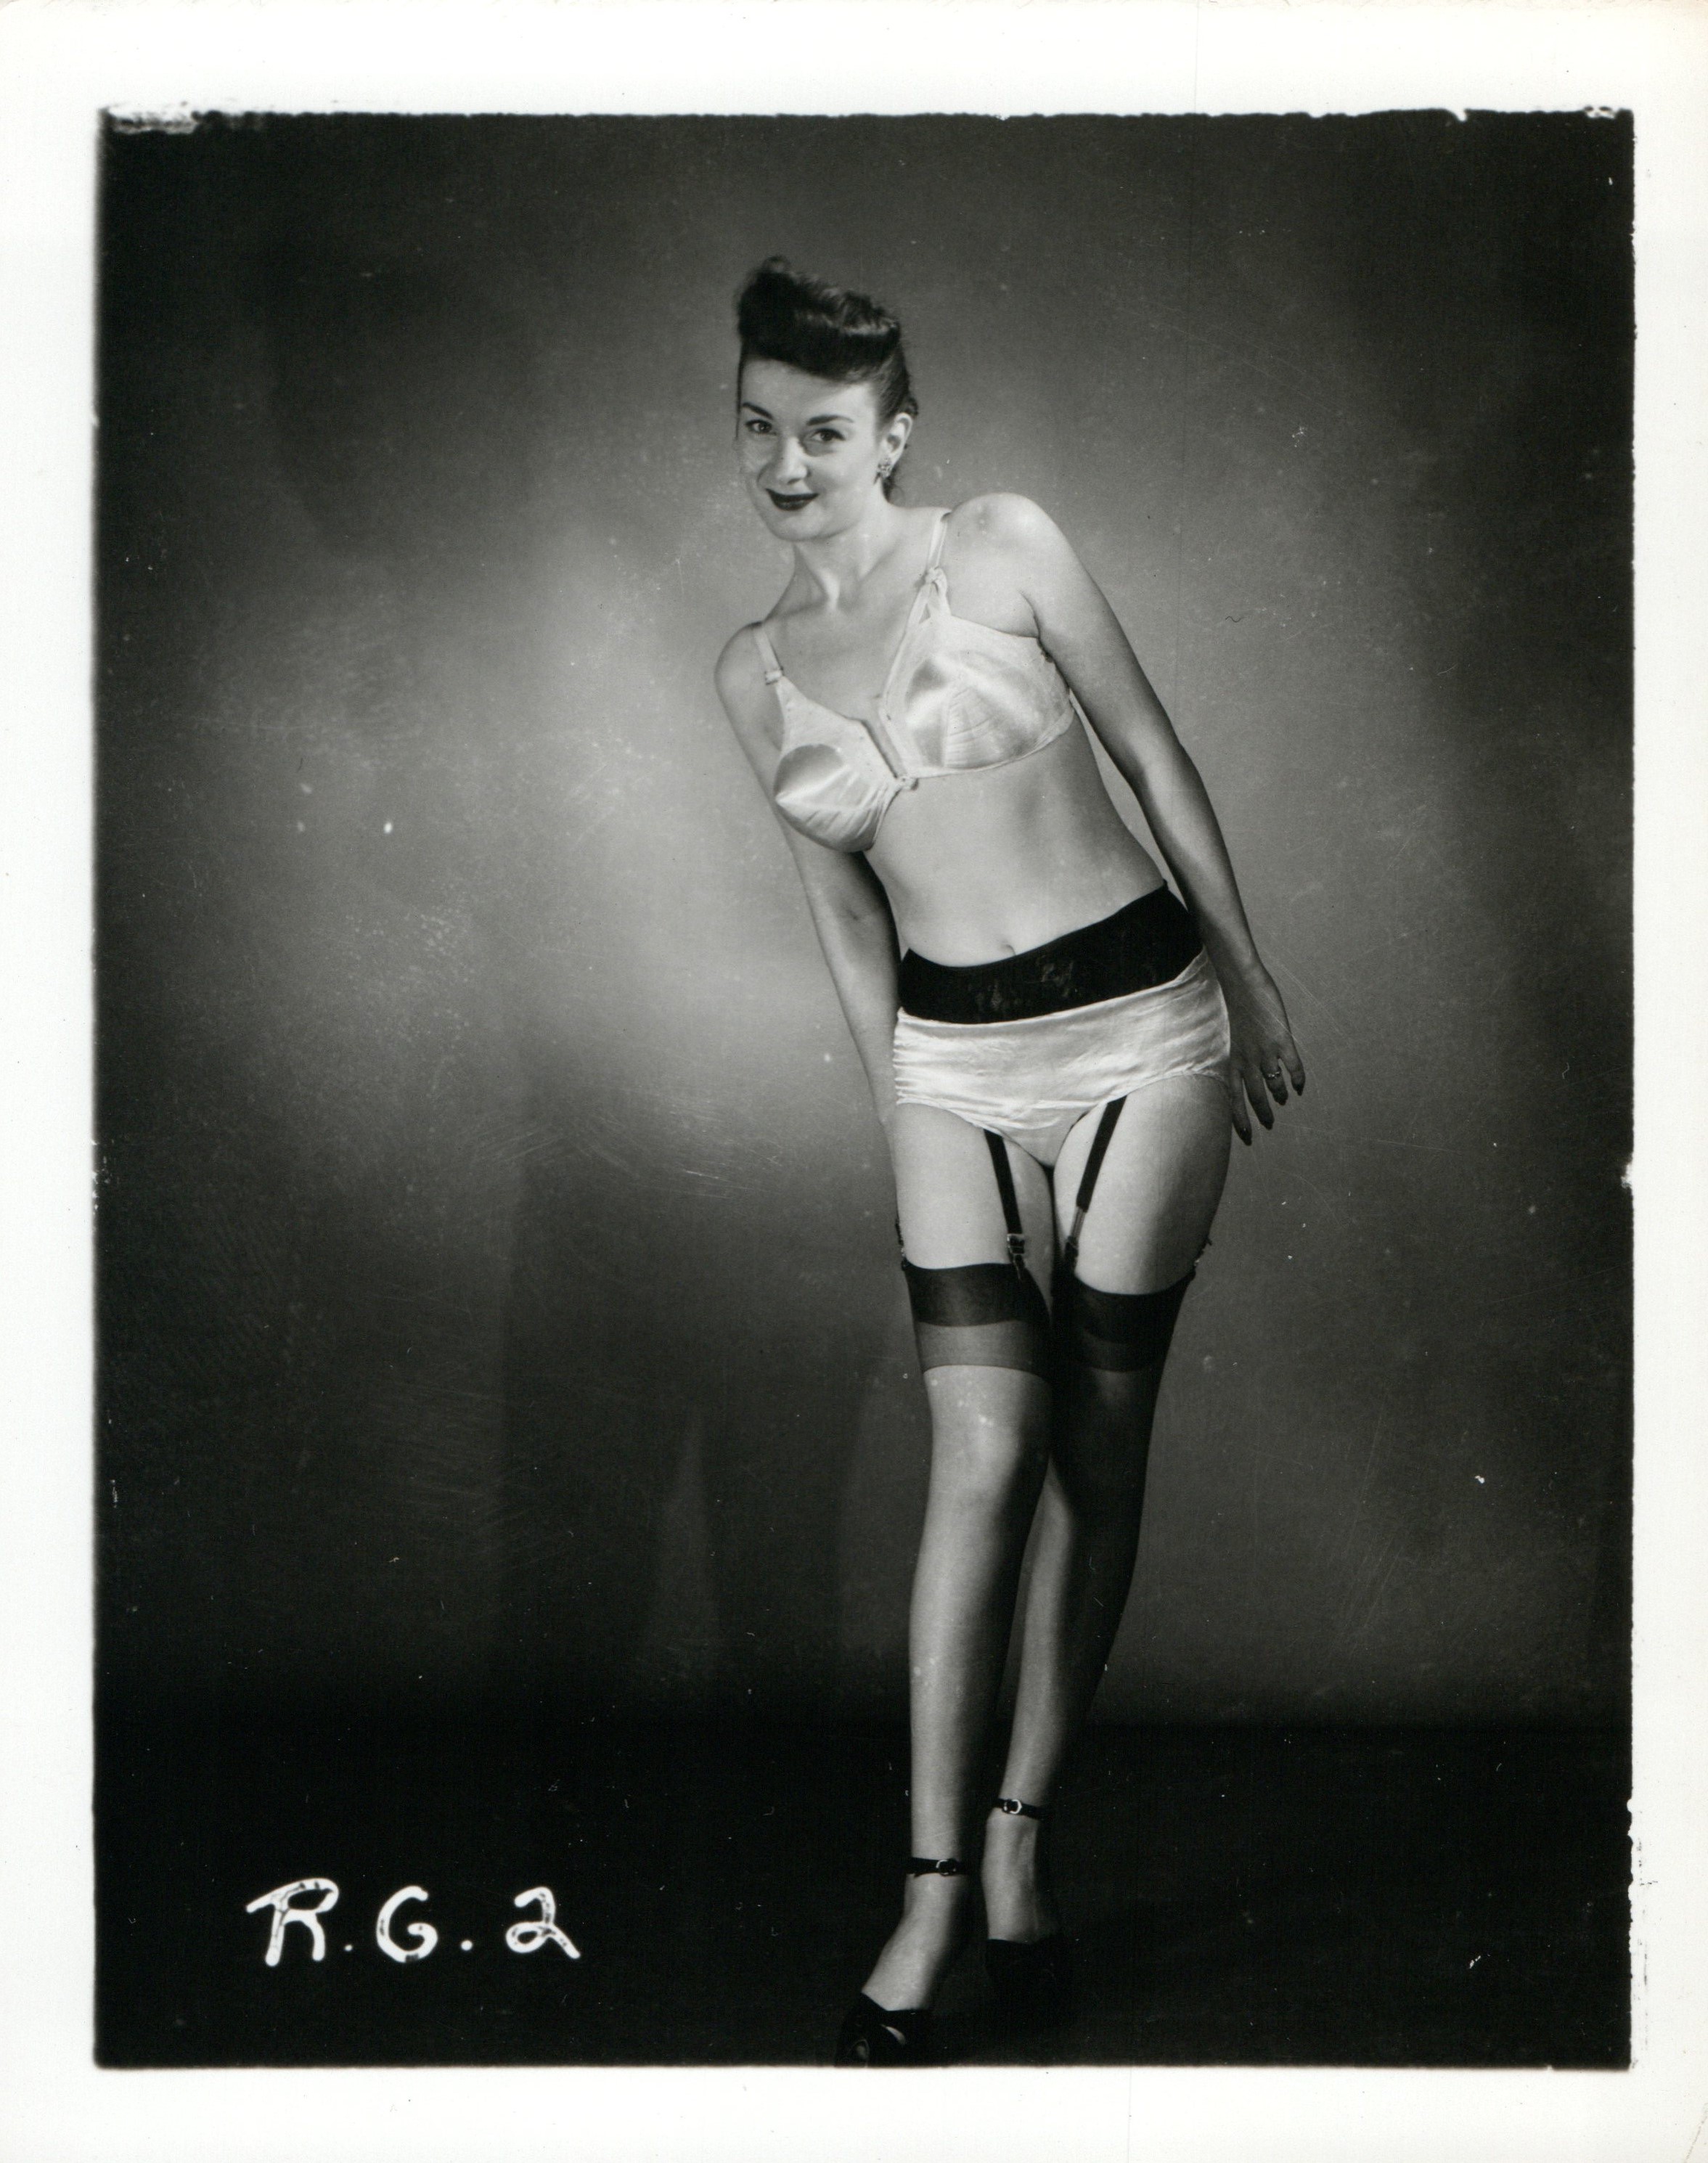 4 X 5 ORIGINAL PIN UP PHOTO FROM IRVING KLAW ARCHIVES OF MODEL SHEENAH  #38 